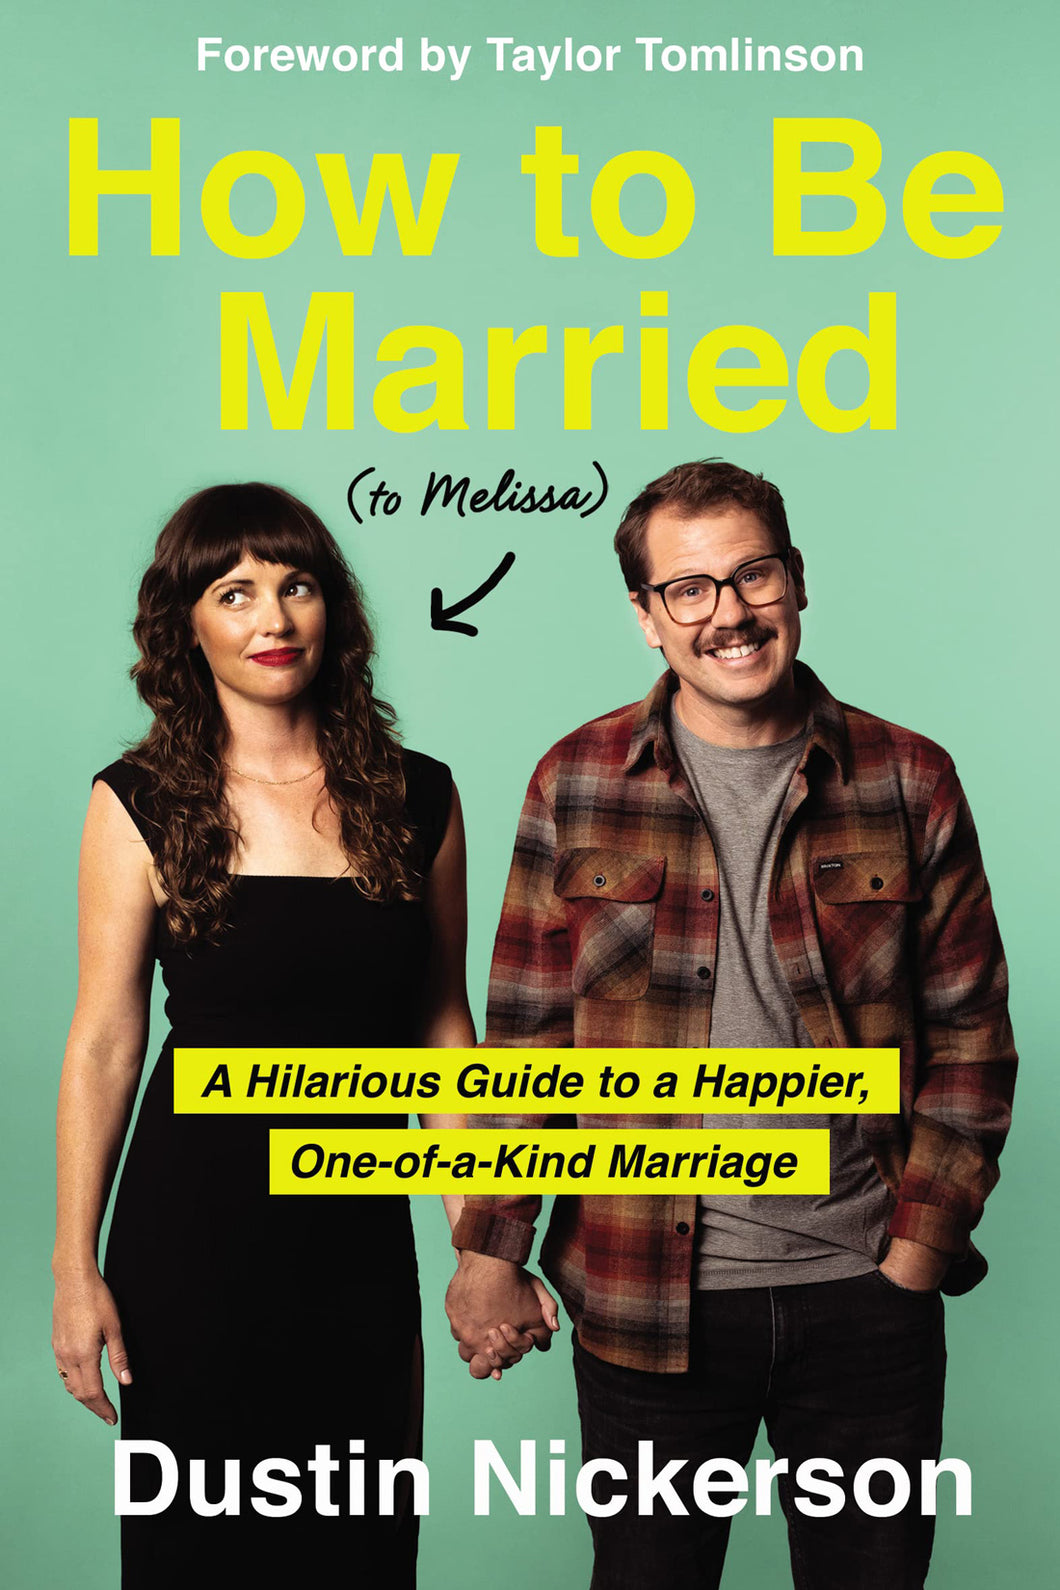 How to Be Married (to Melissa): A Hilarious Guide to a Happier, One-Of-A-Kind Marriage by Dustin Nickerson / Hardcover - NEW BOOK OR BOOK BOX